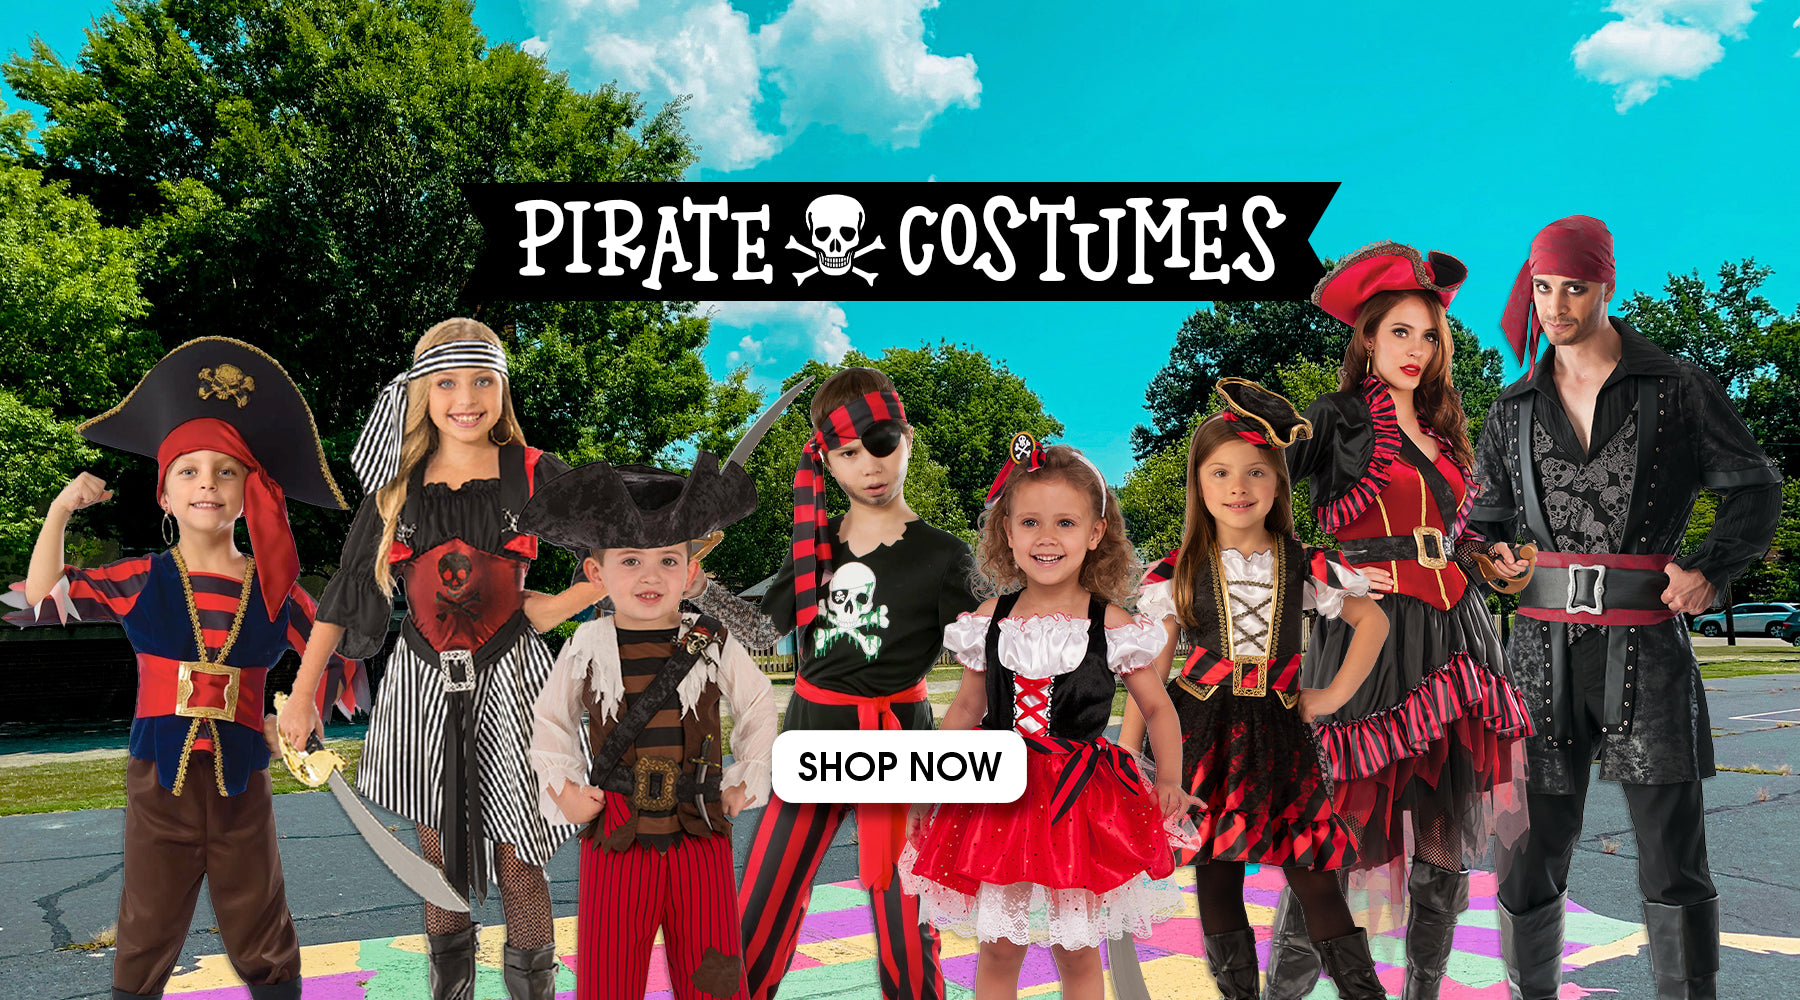 Argh you ready to walk the plank? Make sure you dress the part with these great pirate costumes for kids and adults. Available online at Costume Super Centre Australia